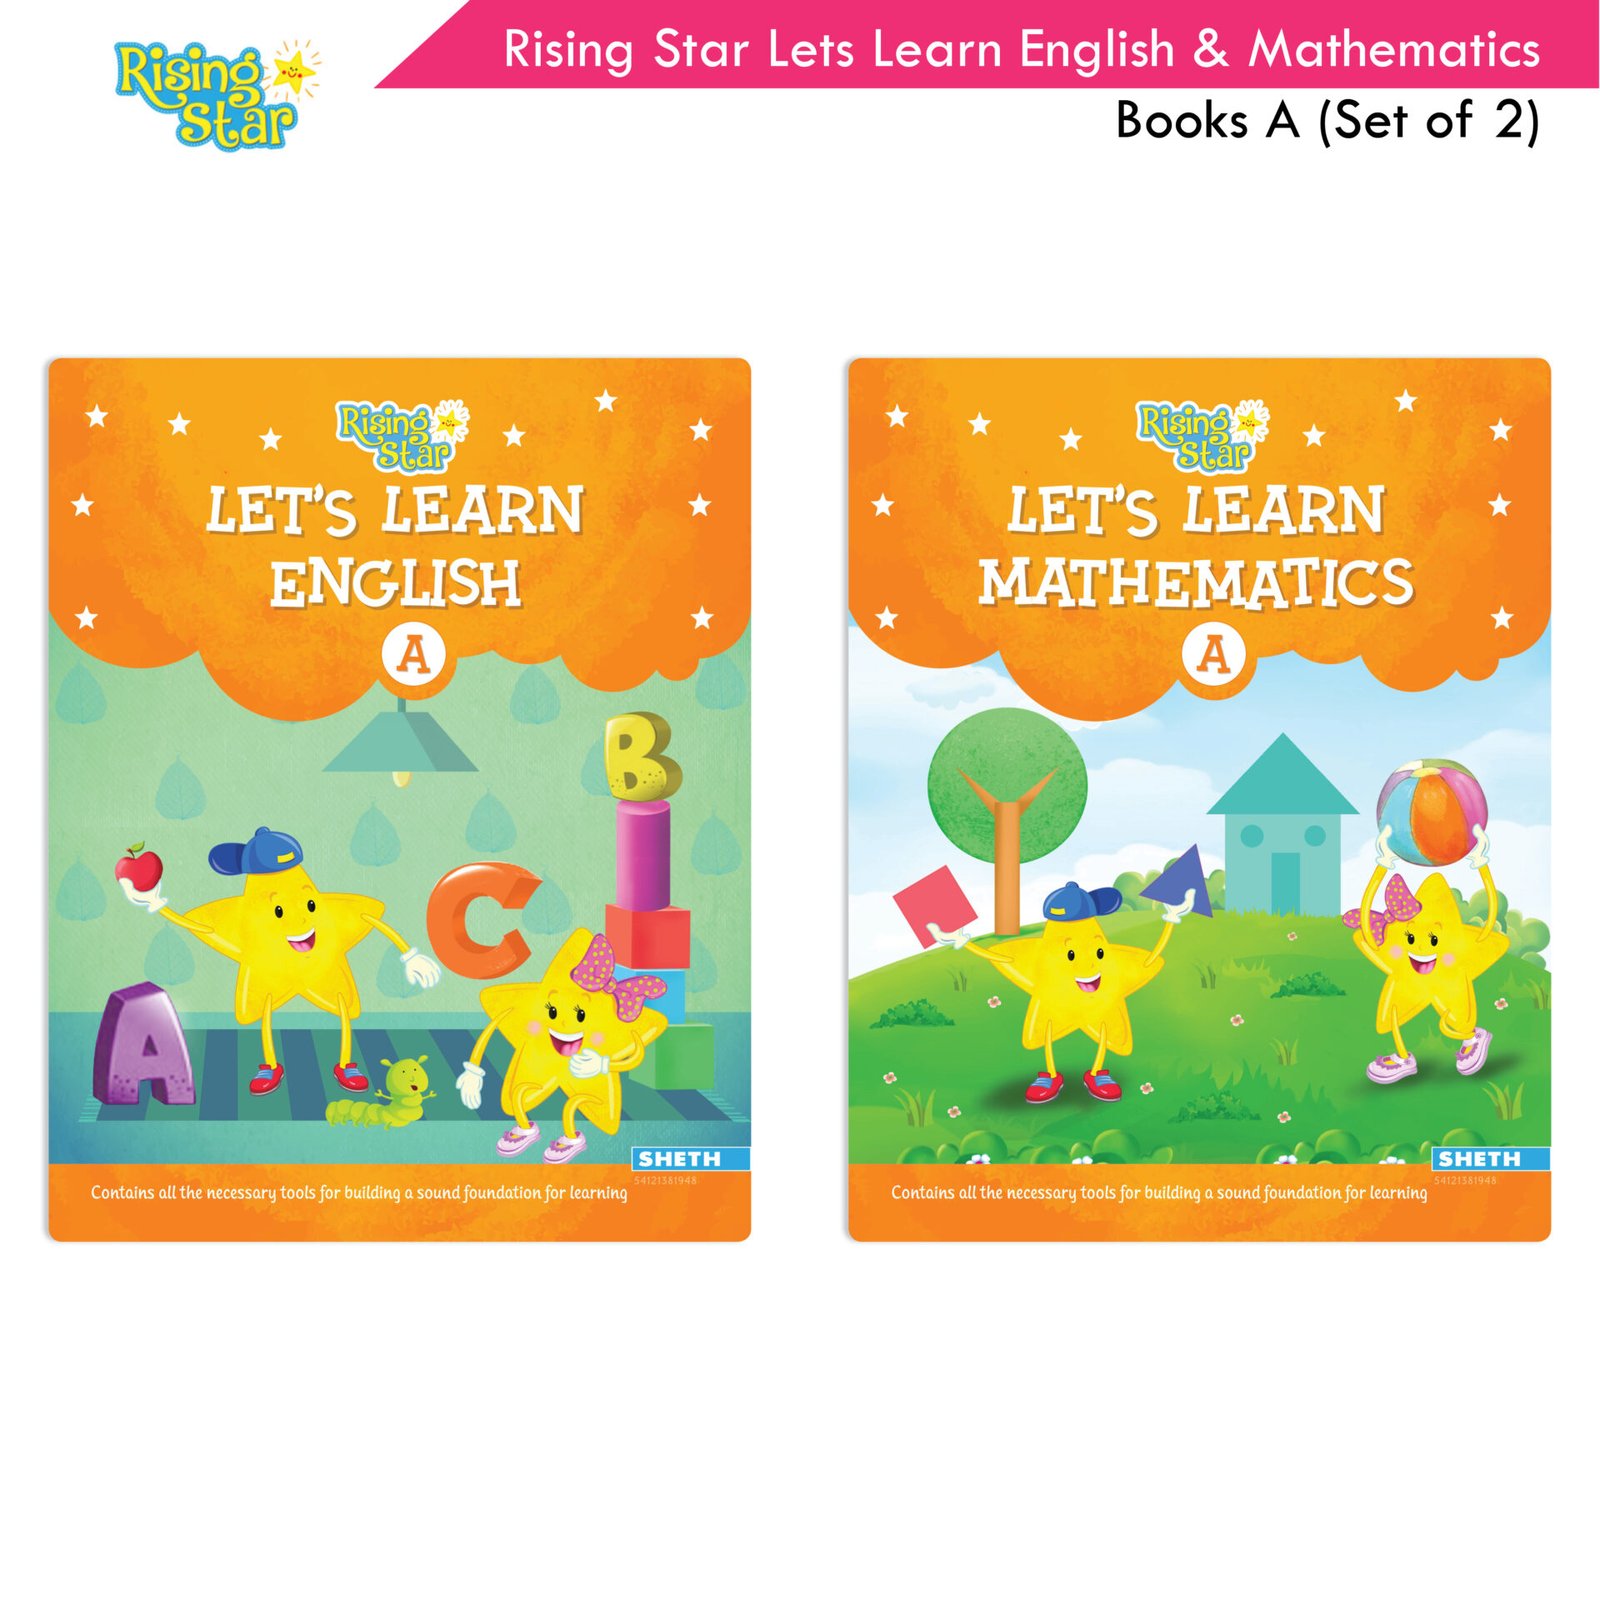 Rising Star Lets Learn English and Mathematics Books A Set of 2 1